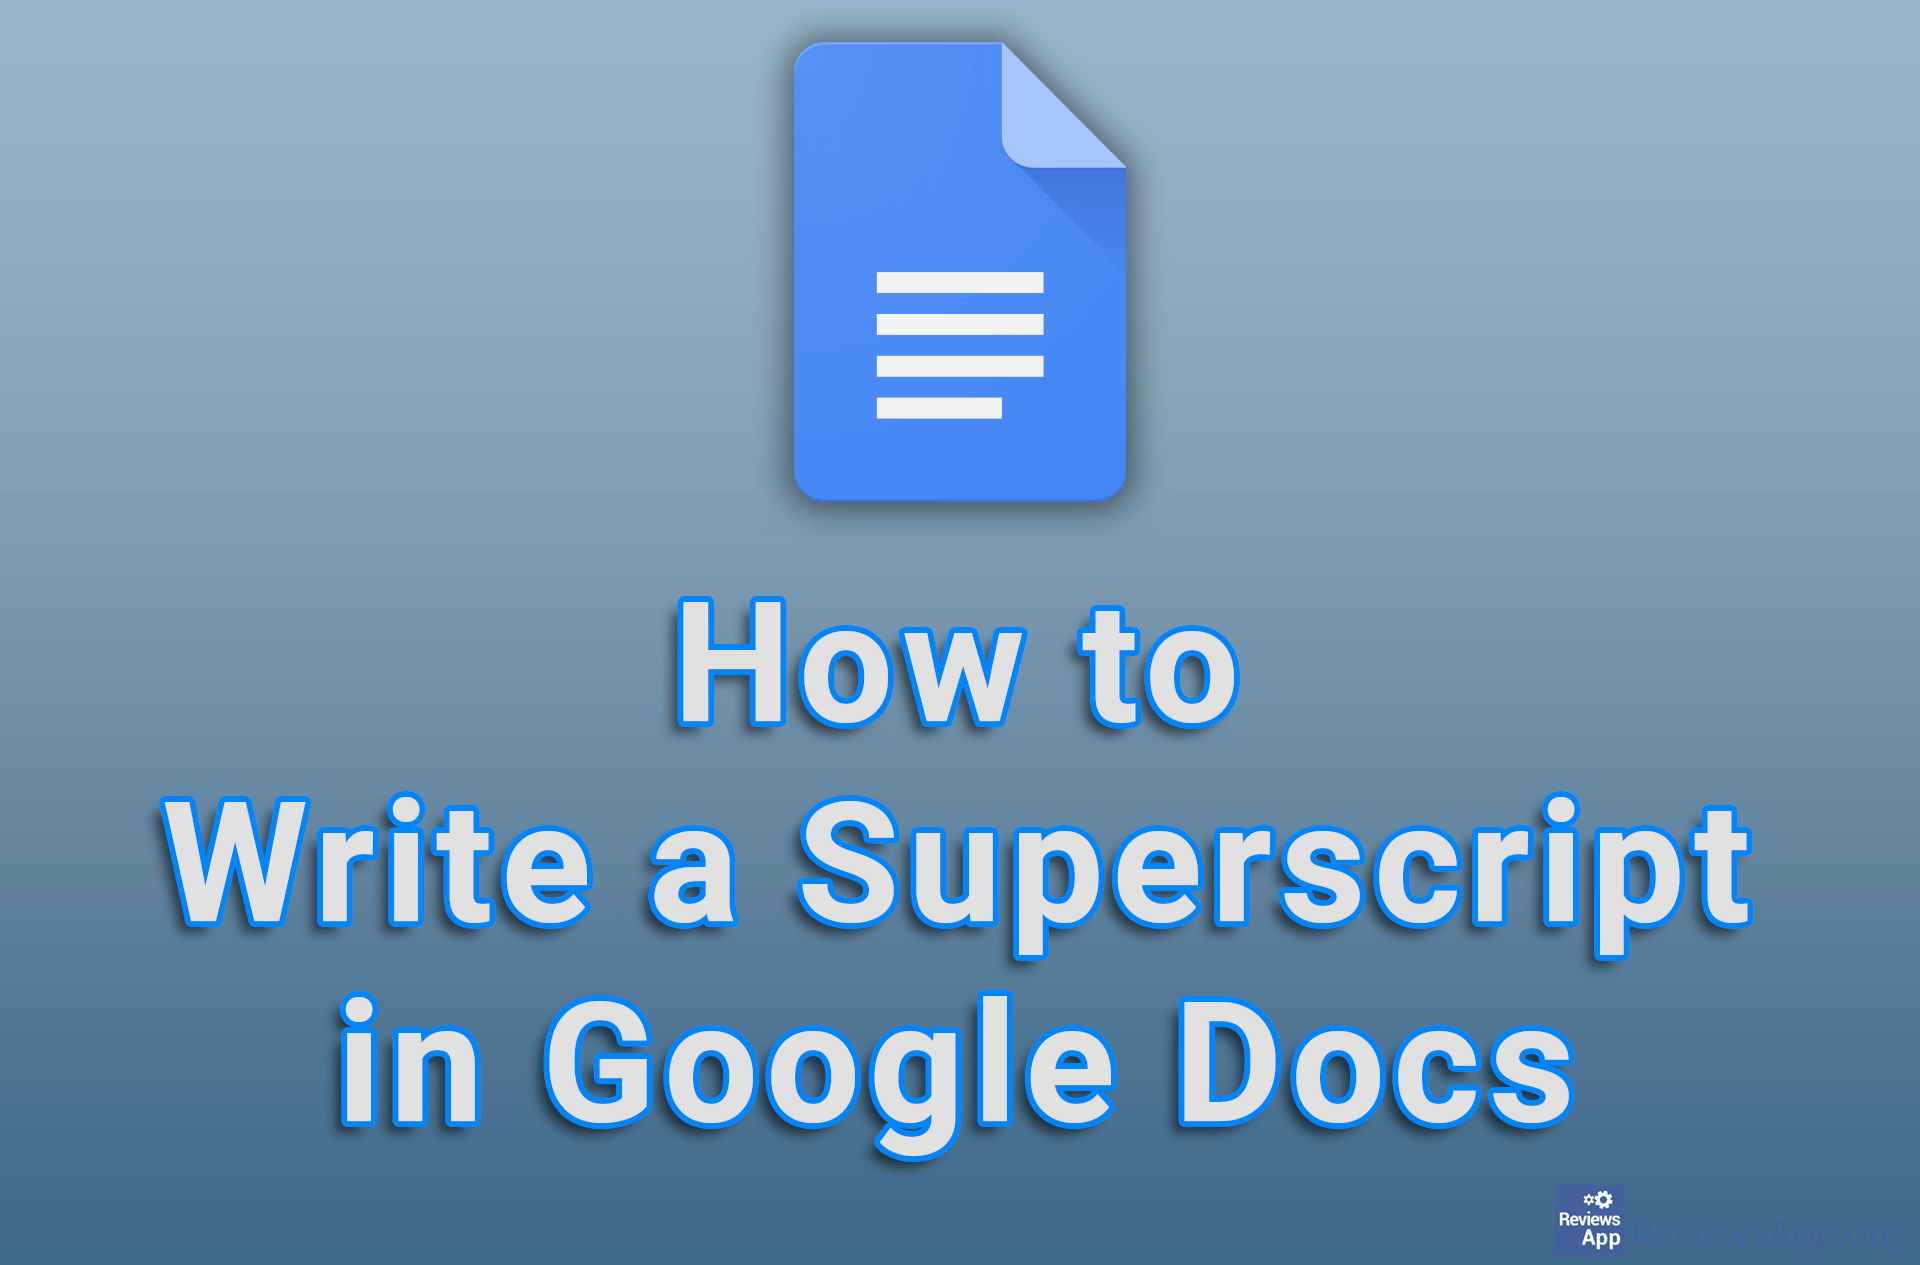 How to Write a Superscript in Google Docs